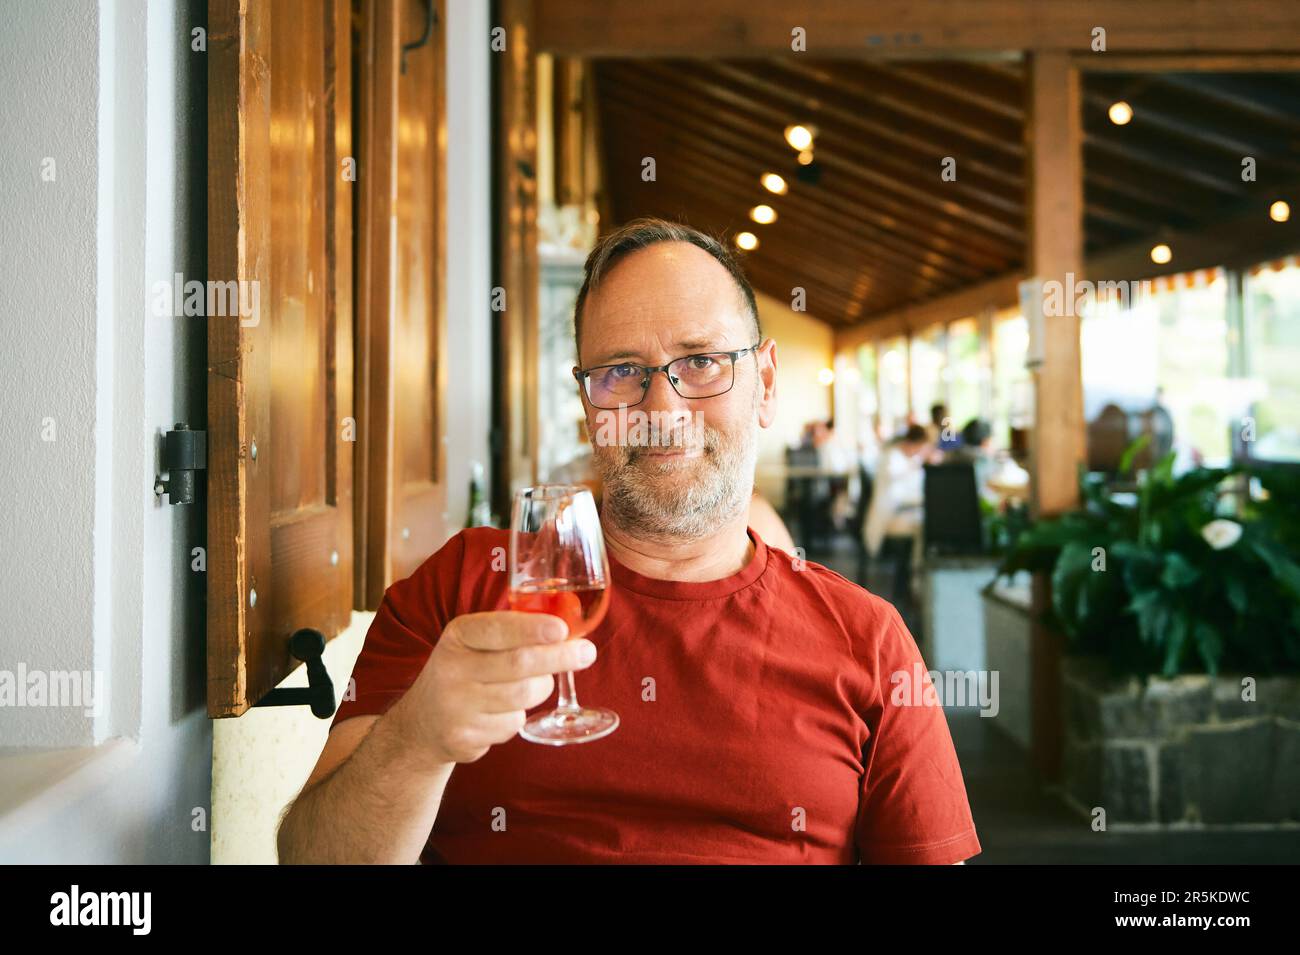 Portrait of middle age man in indoor restaurant, holding glass of wine Stock Photo